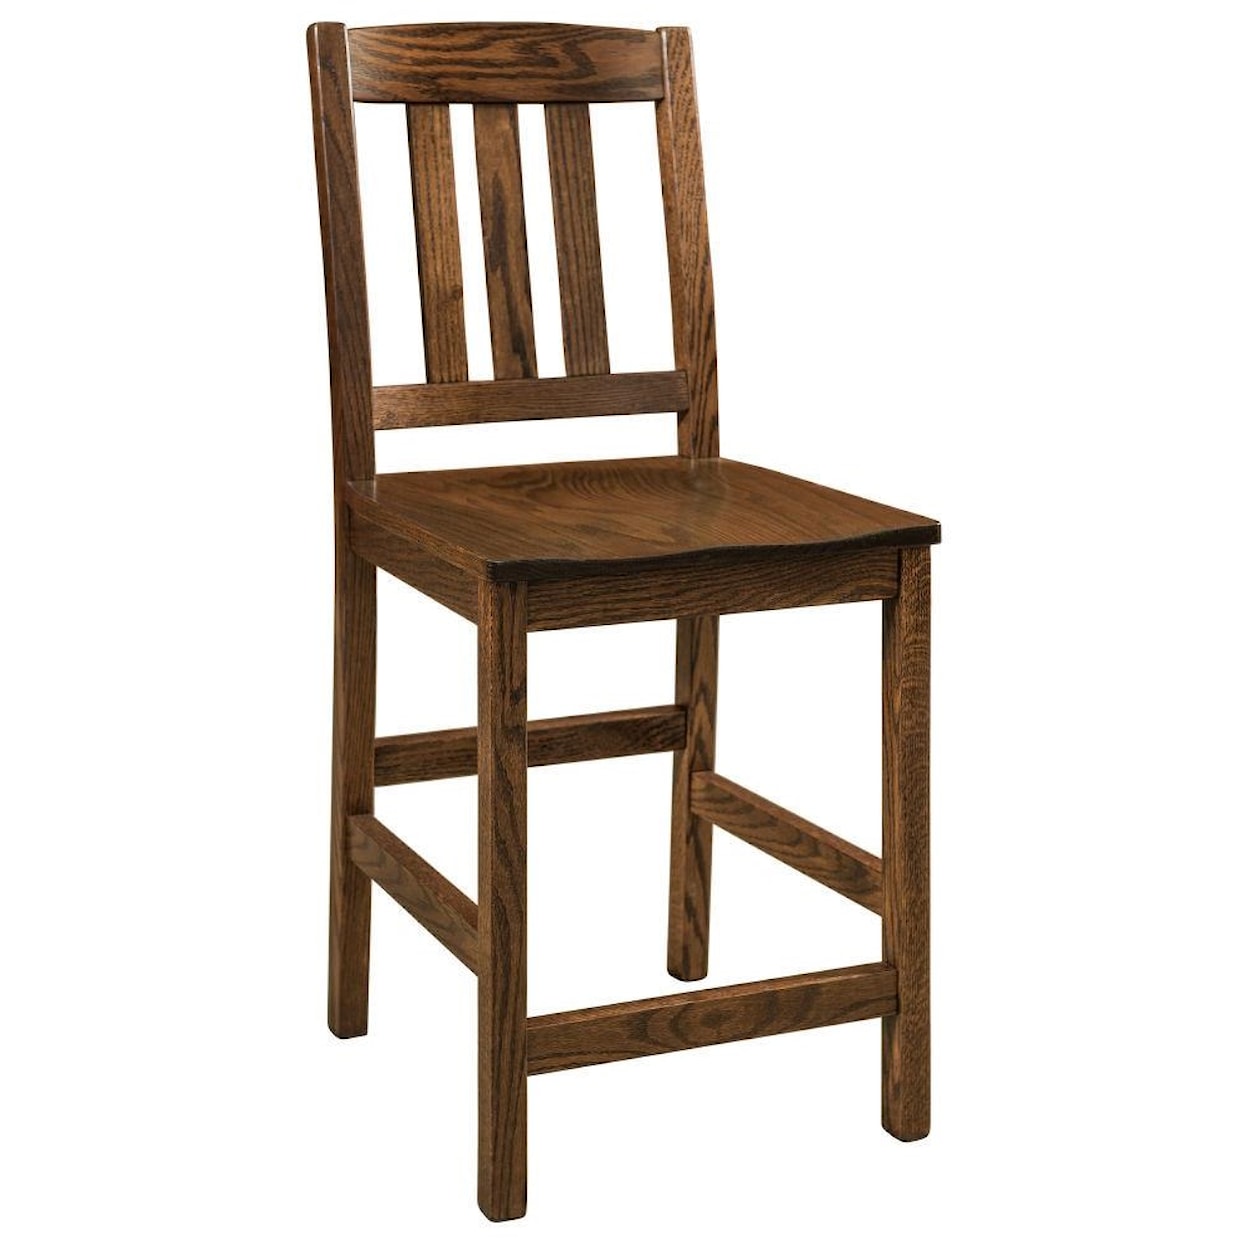 F&N Woodworking Lodge 24" Stationary Stool